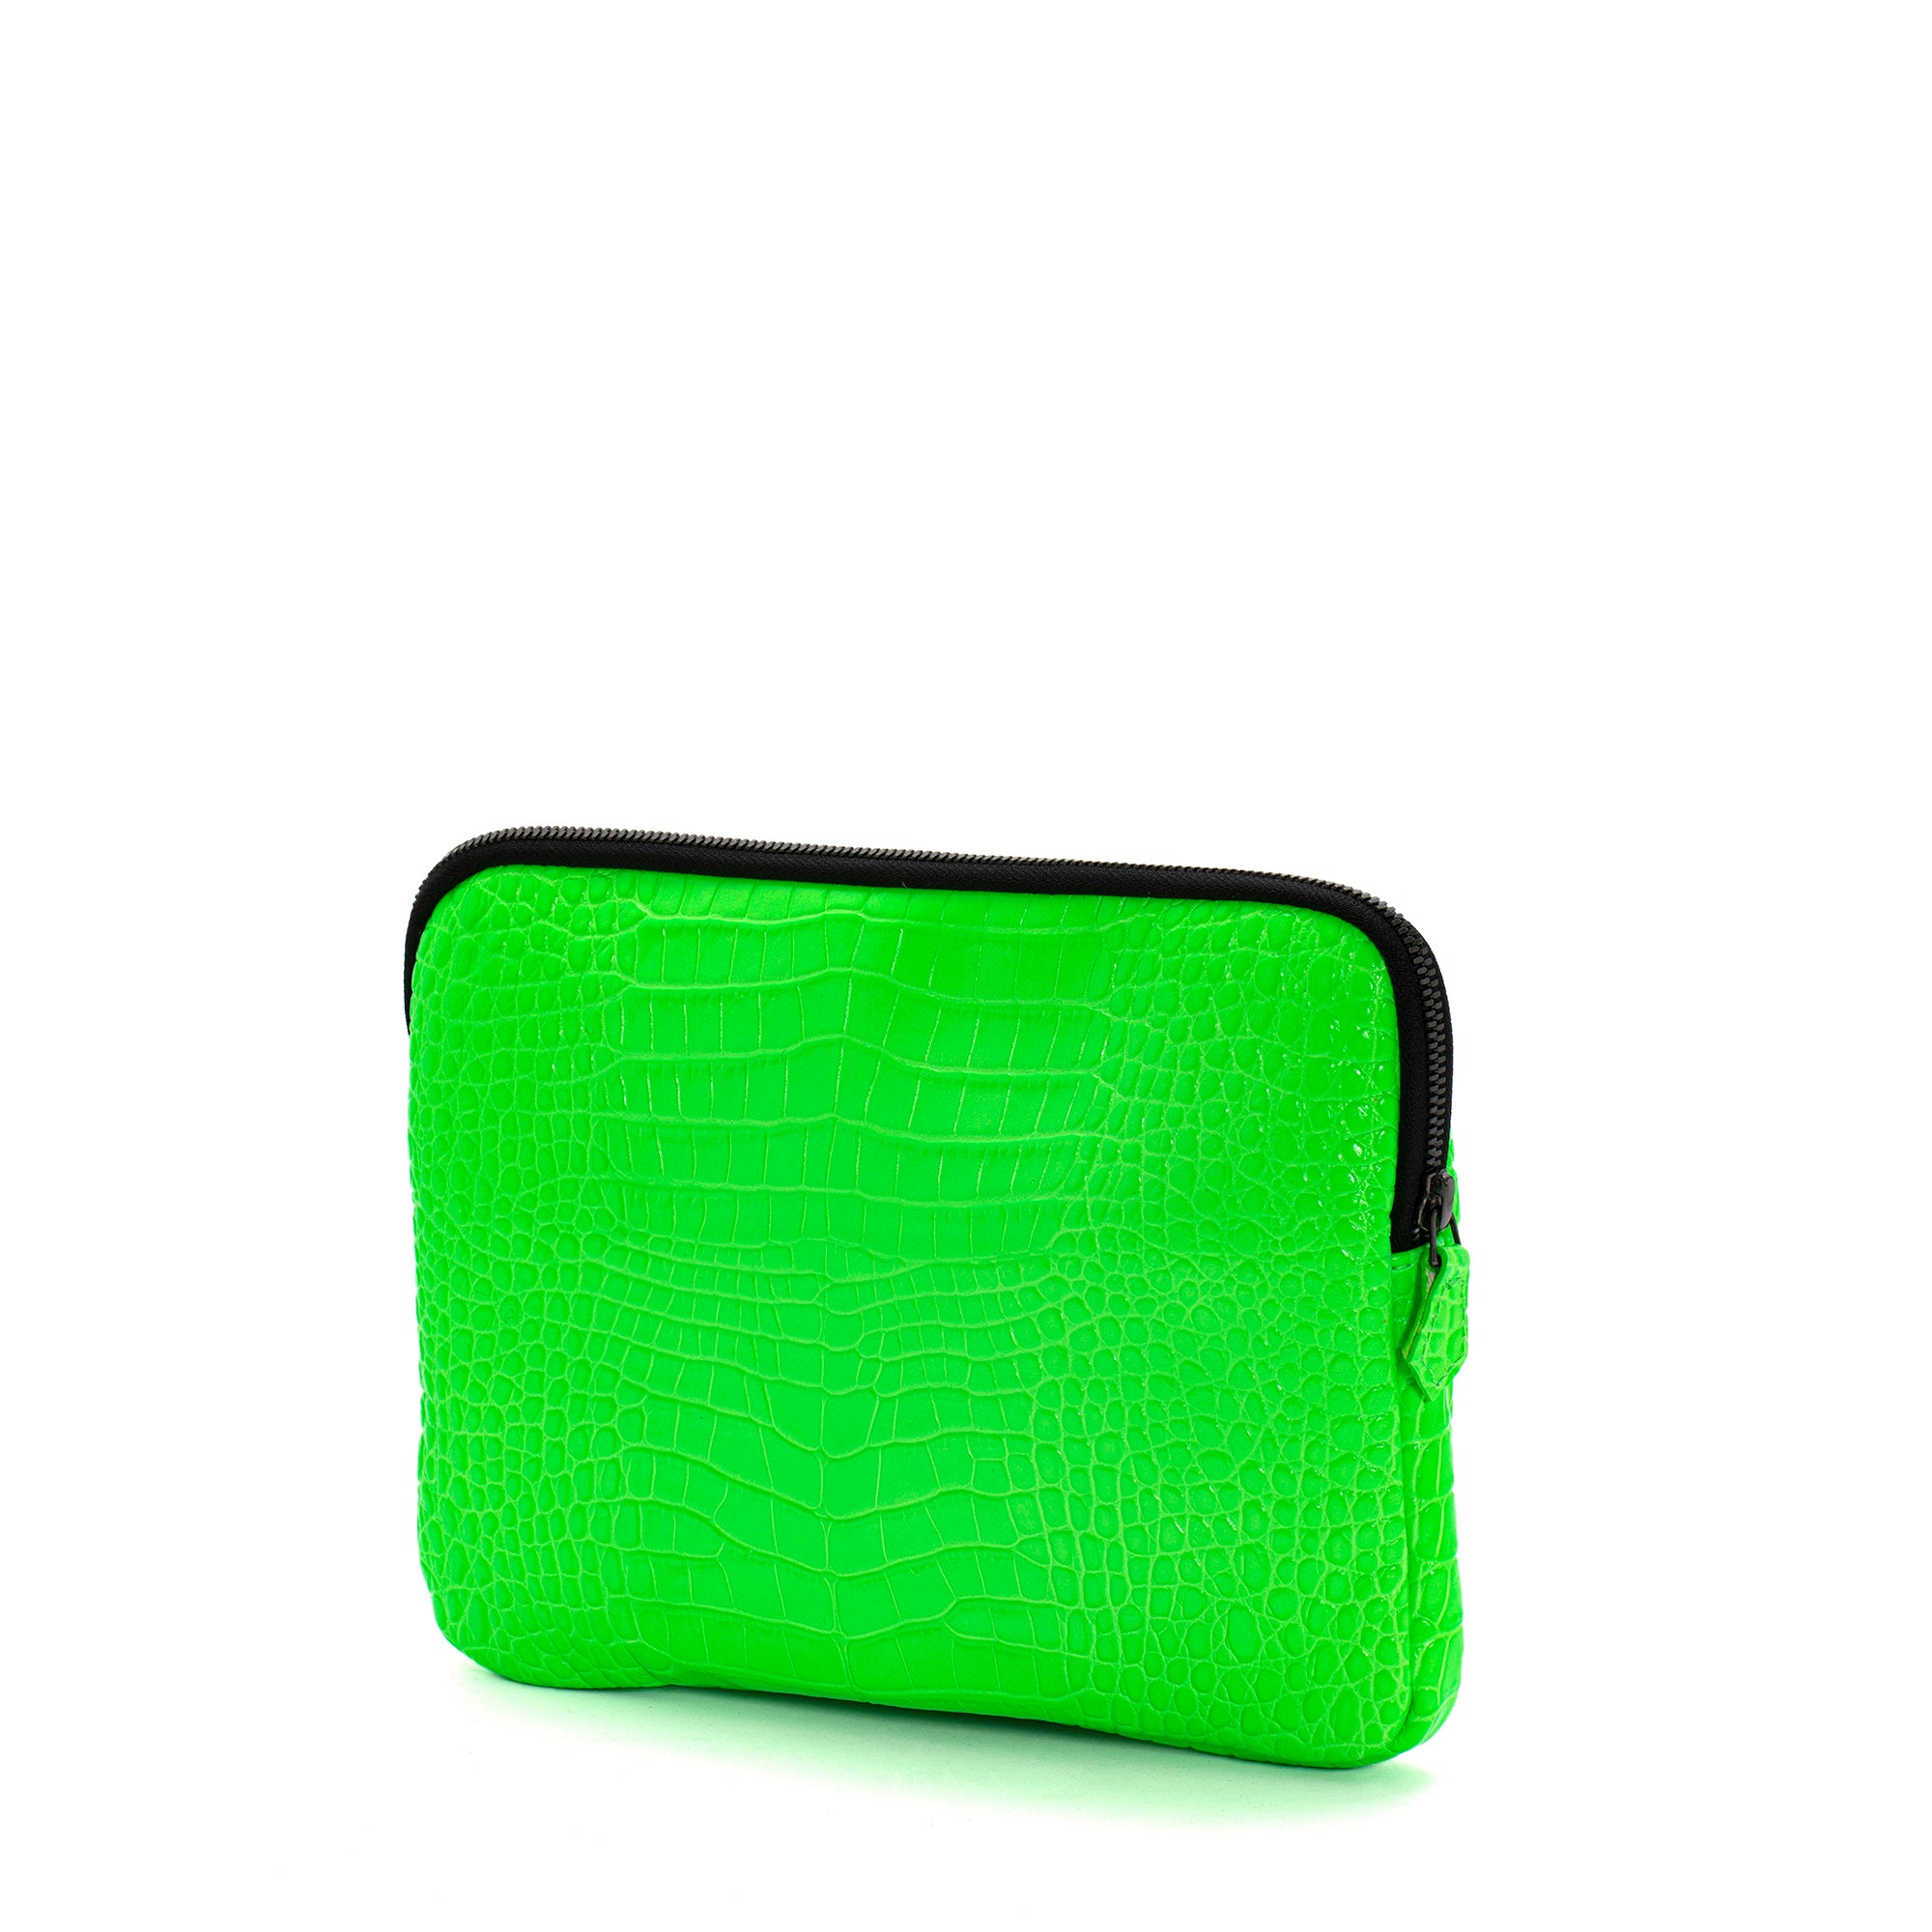 SALE: Clutch Bag Silk-lined Purse Lime Green Chartreuse - Etsy | Bags,  Purses, Evening clutch bag